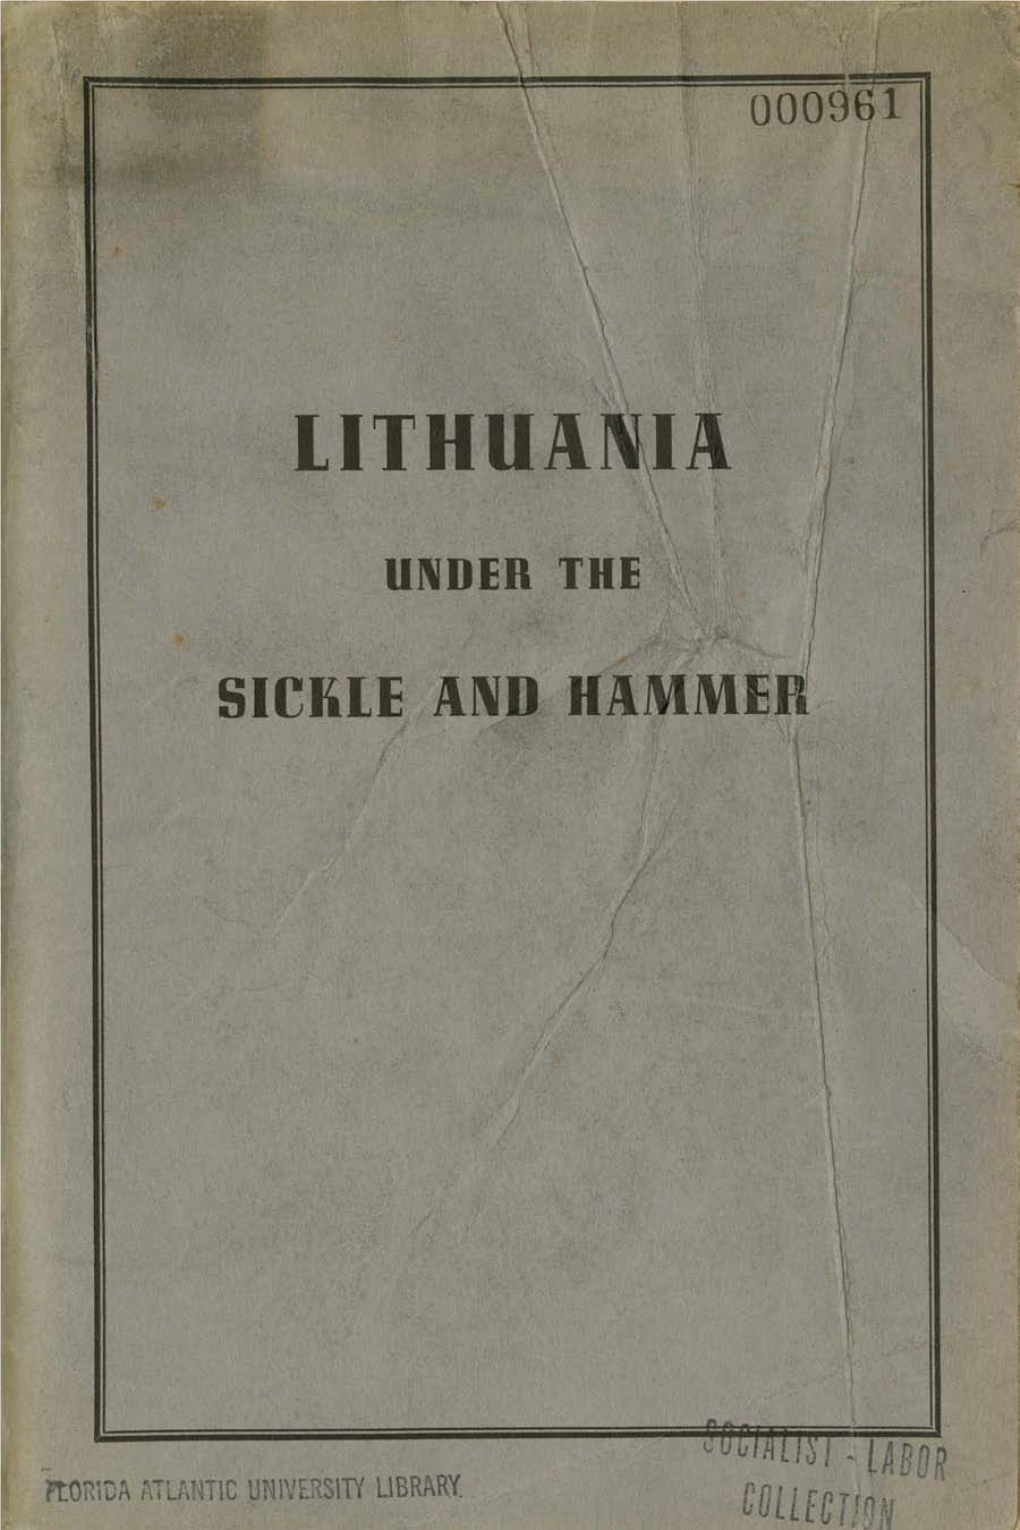 Lithuania Under the Sickle and Hammer